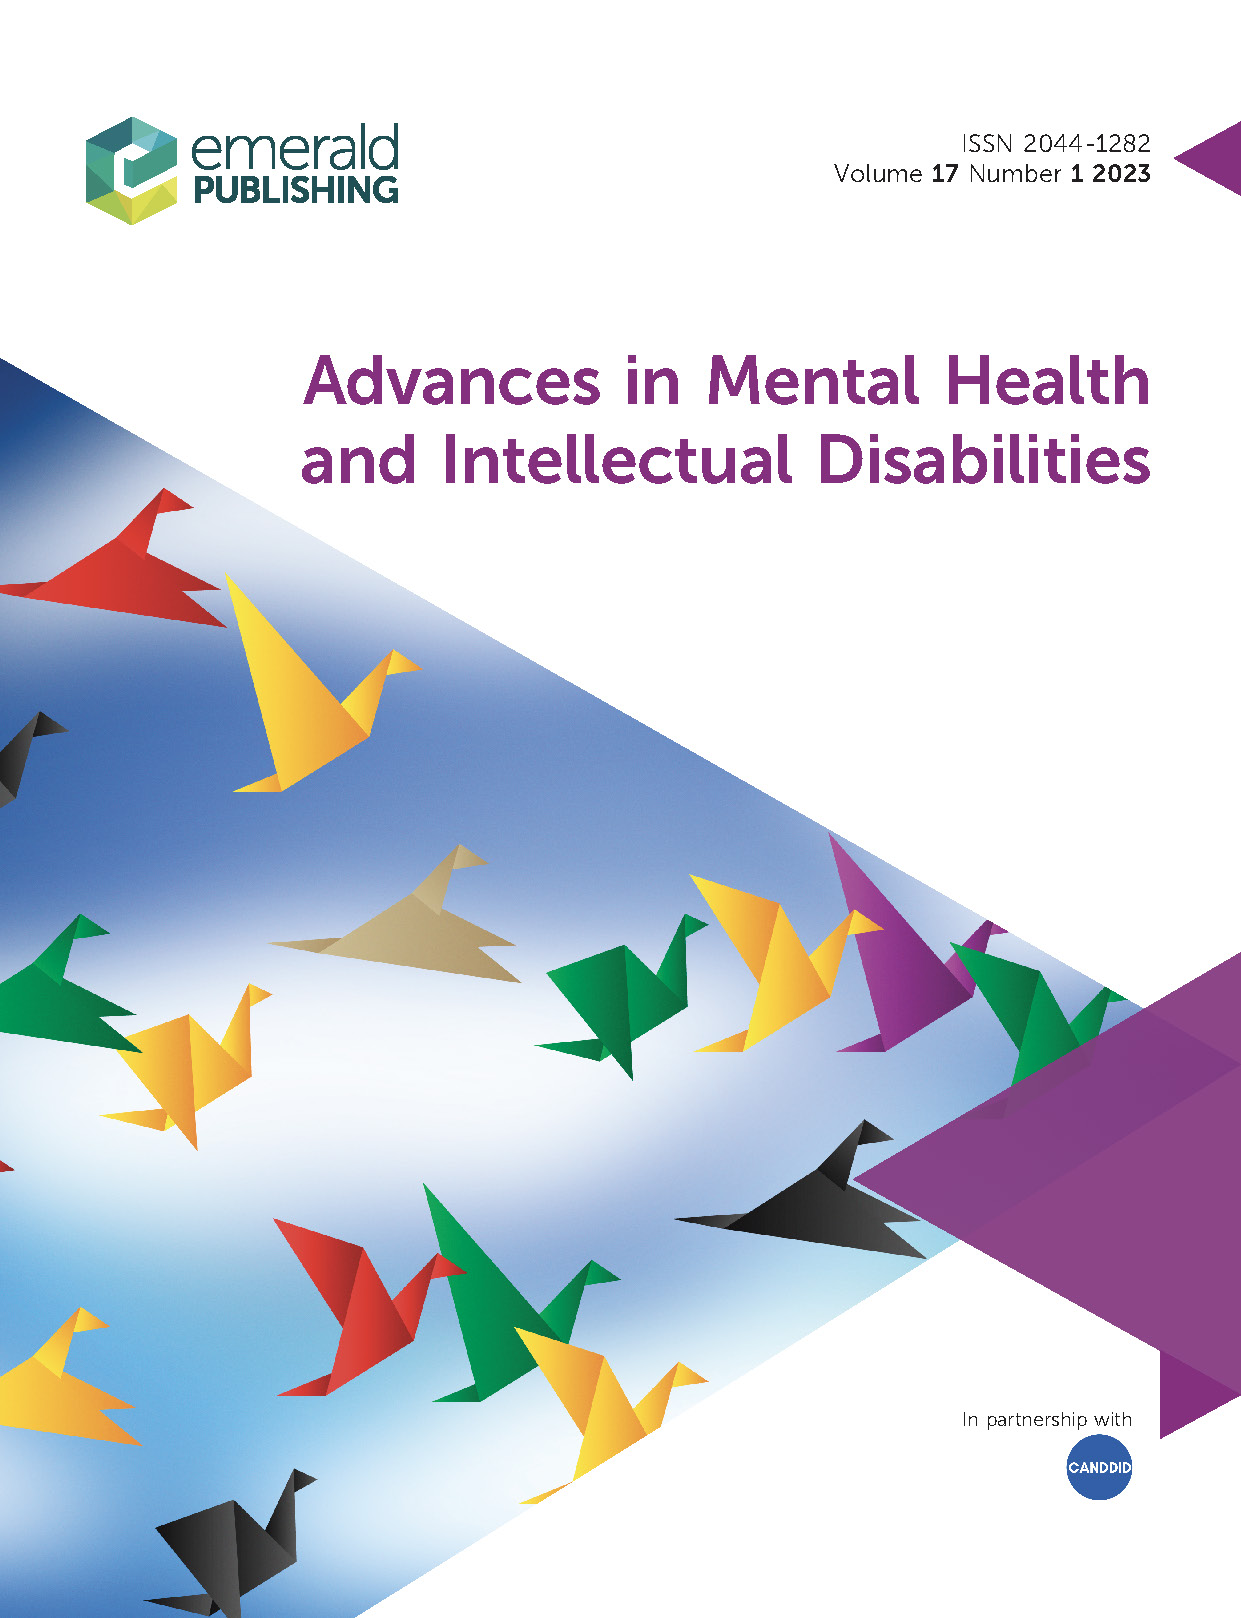 Advances in Mental Health and Intellectual Disabilities